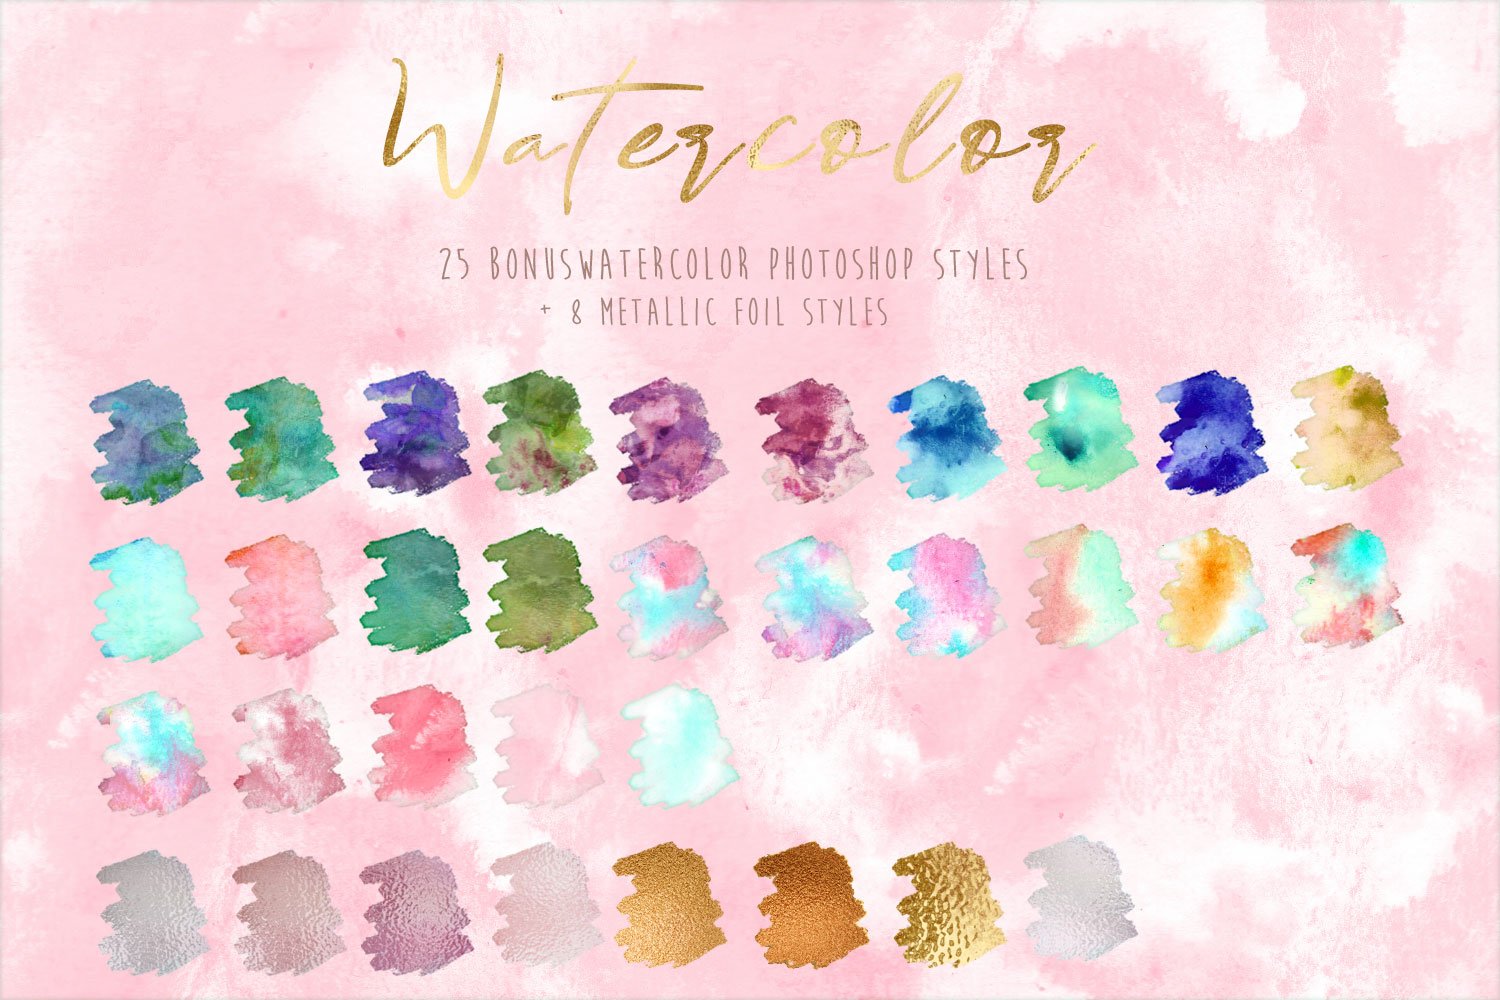 watercolor ps styles cover photo 696